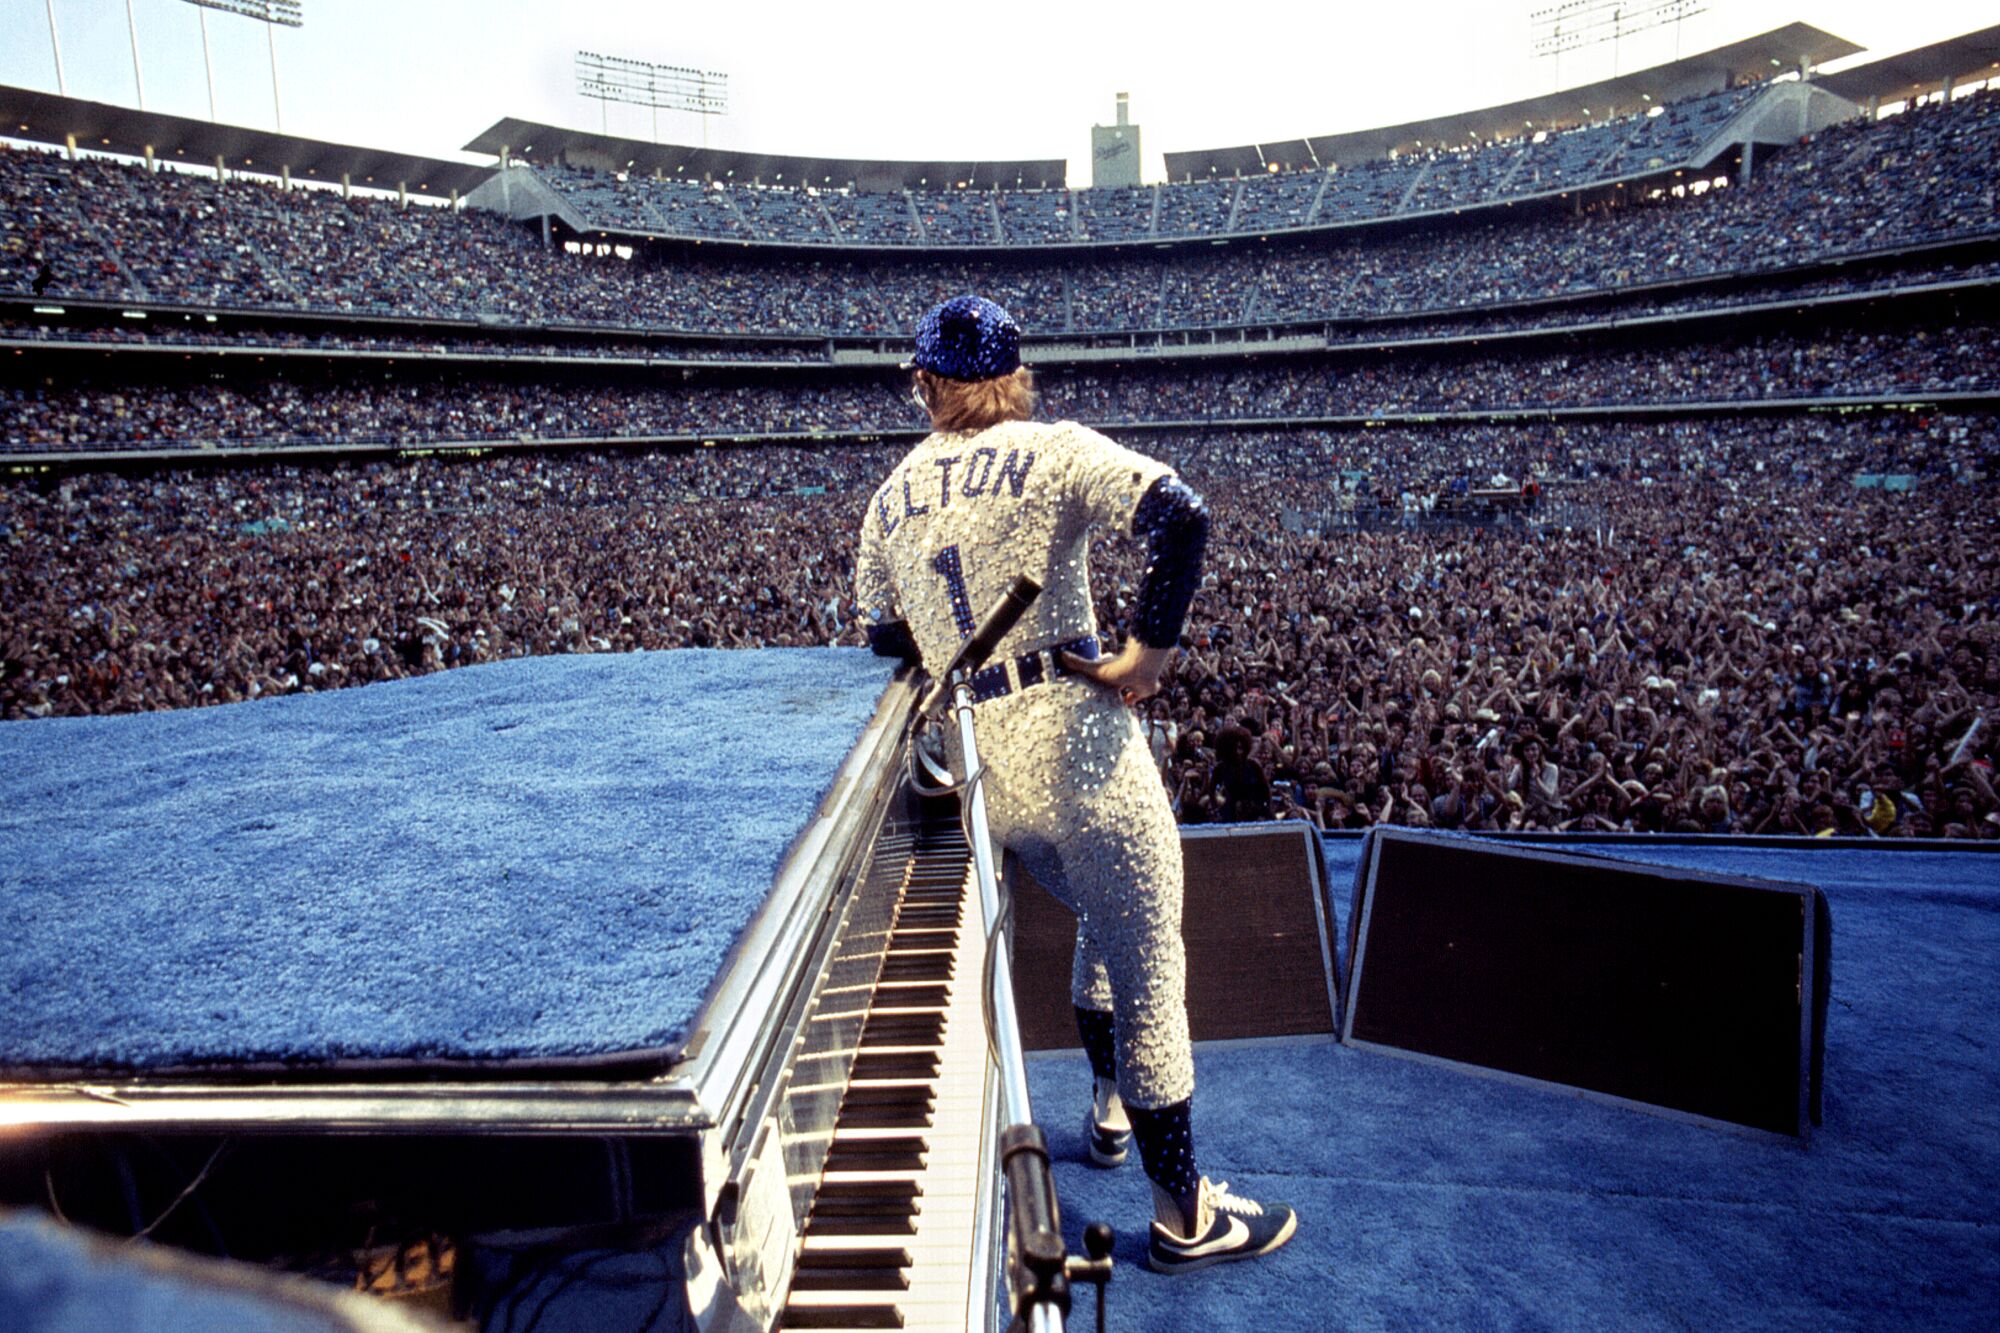 A musician onstage in a sequined Dodgers uniform looks out over a stadium full of fans